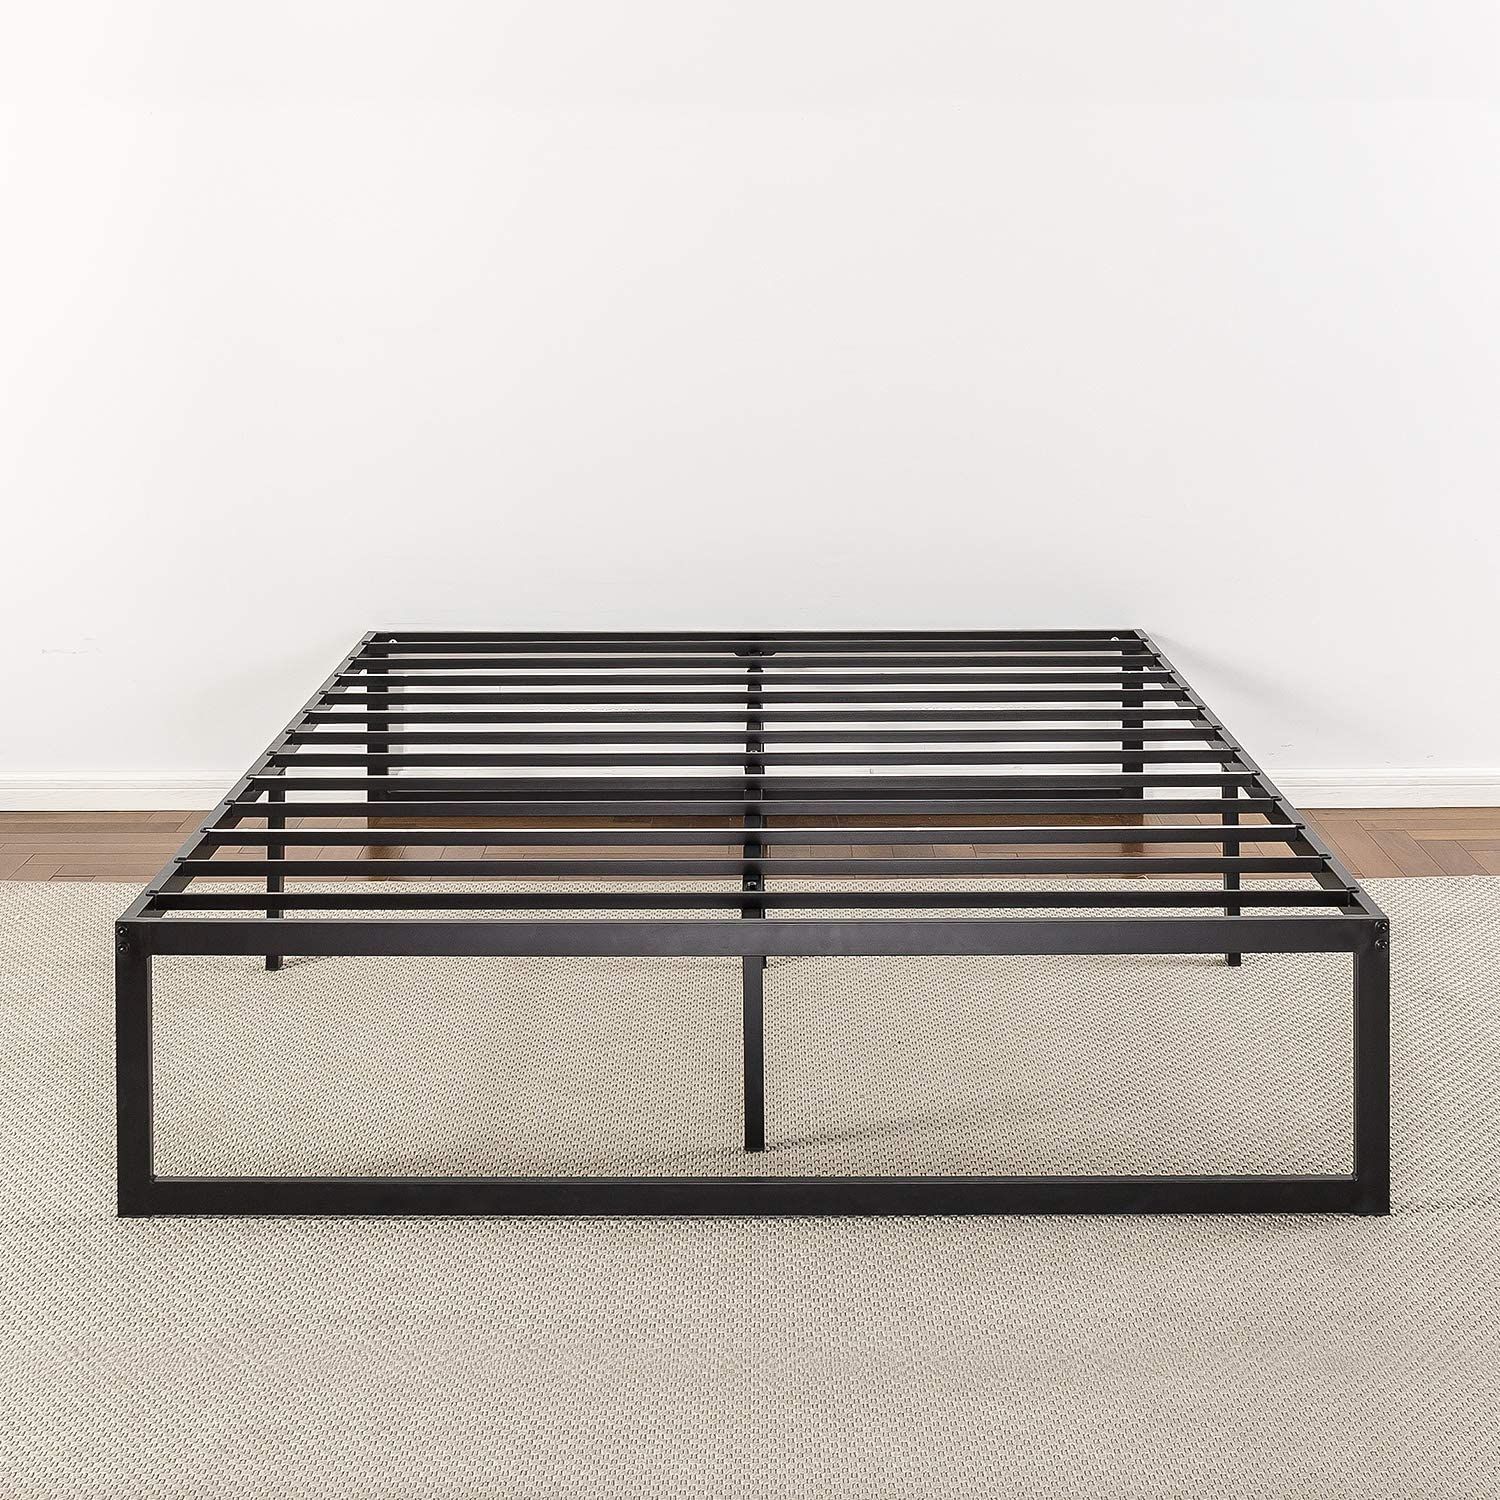 19 Best Metal Bed Frames 2022 The, Can You Use Ikea Slats On A Metal Bed Frame